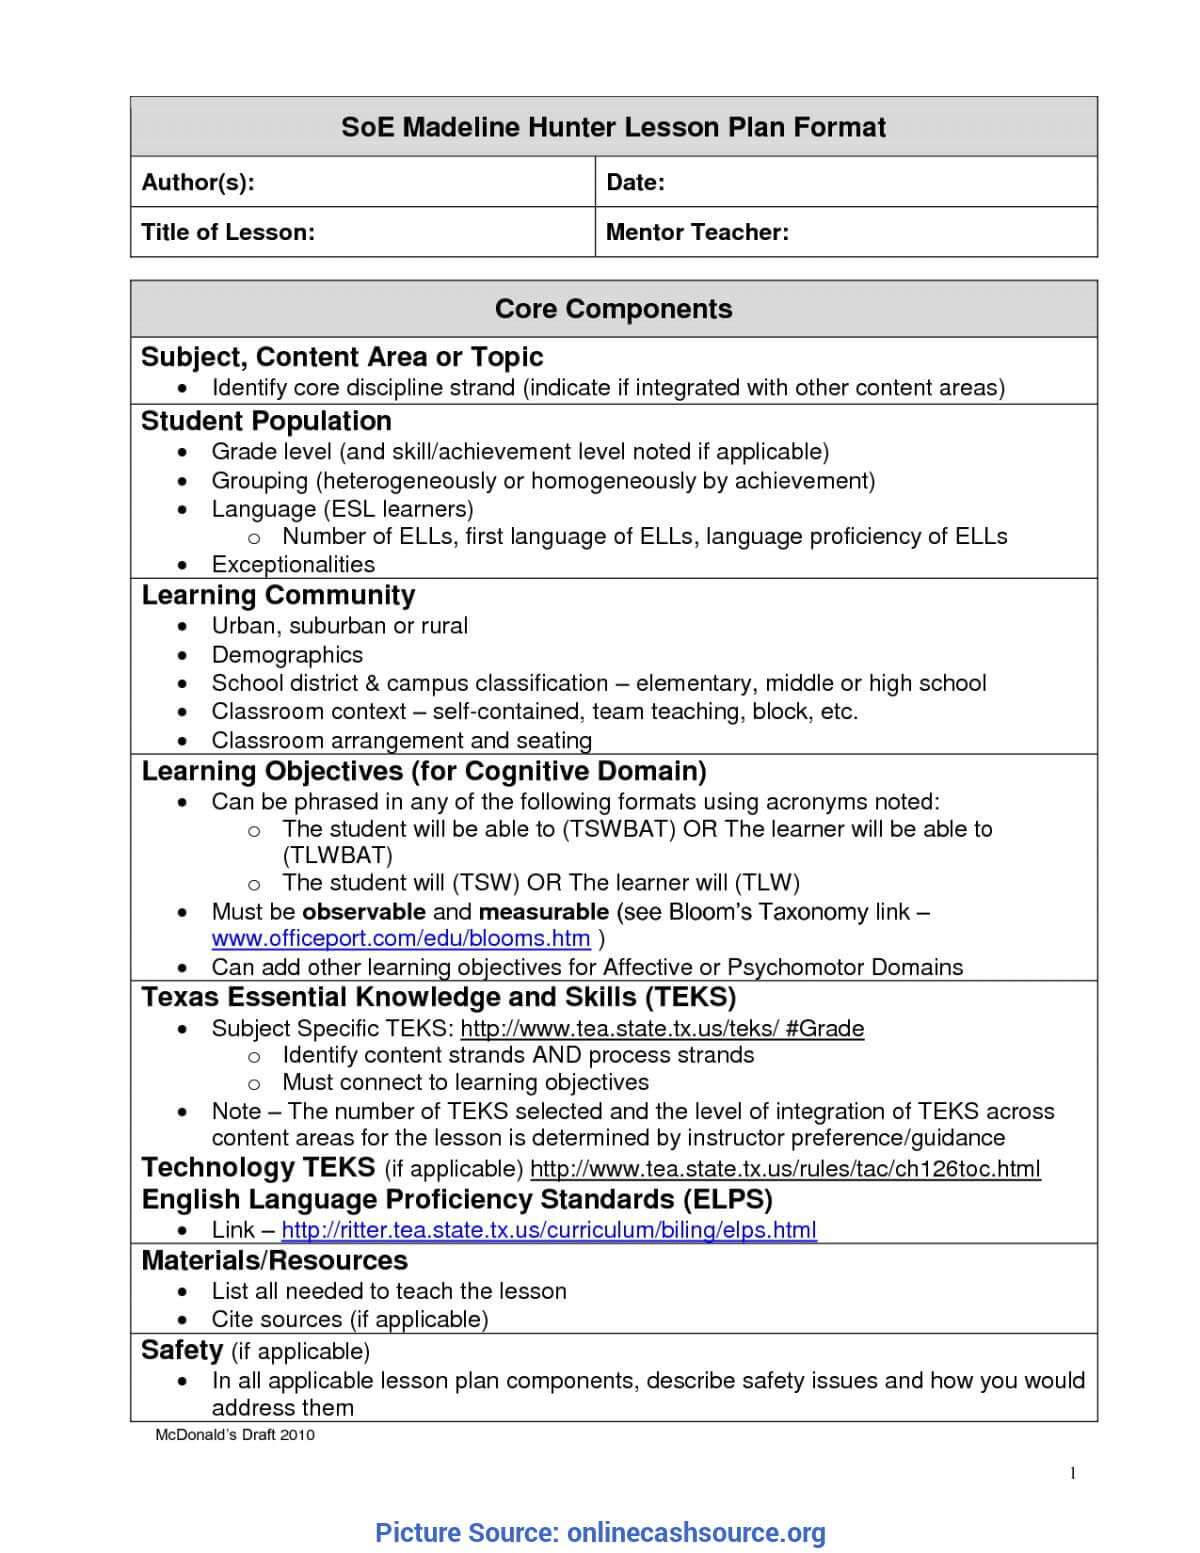 Madeline Hunter Lesson Plan Template Word – Colona.rsd7 Intended For Madeline Hunter Lesson Plan Template Blank